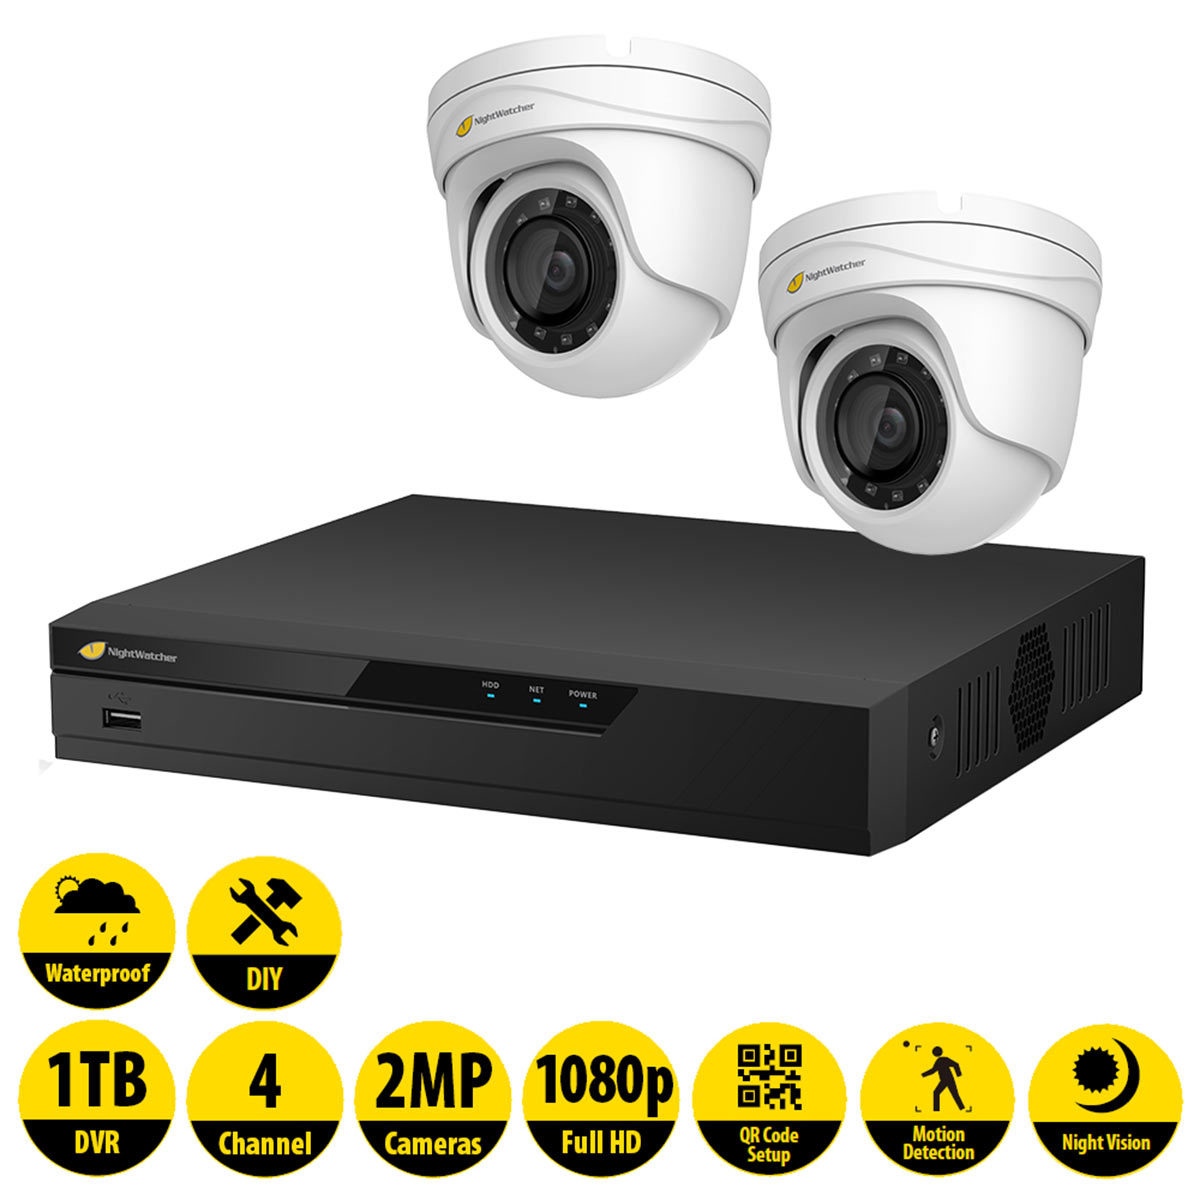 NightWatcher 2MP 4 Channel Digital Video Recorder CCTV Kit with 2 x 2MP Dome Cameras